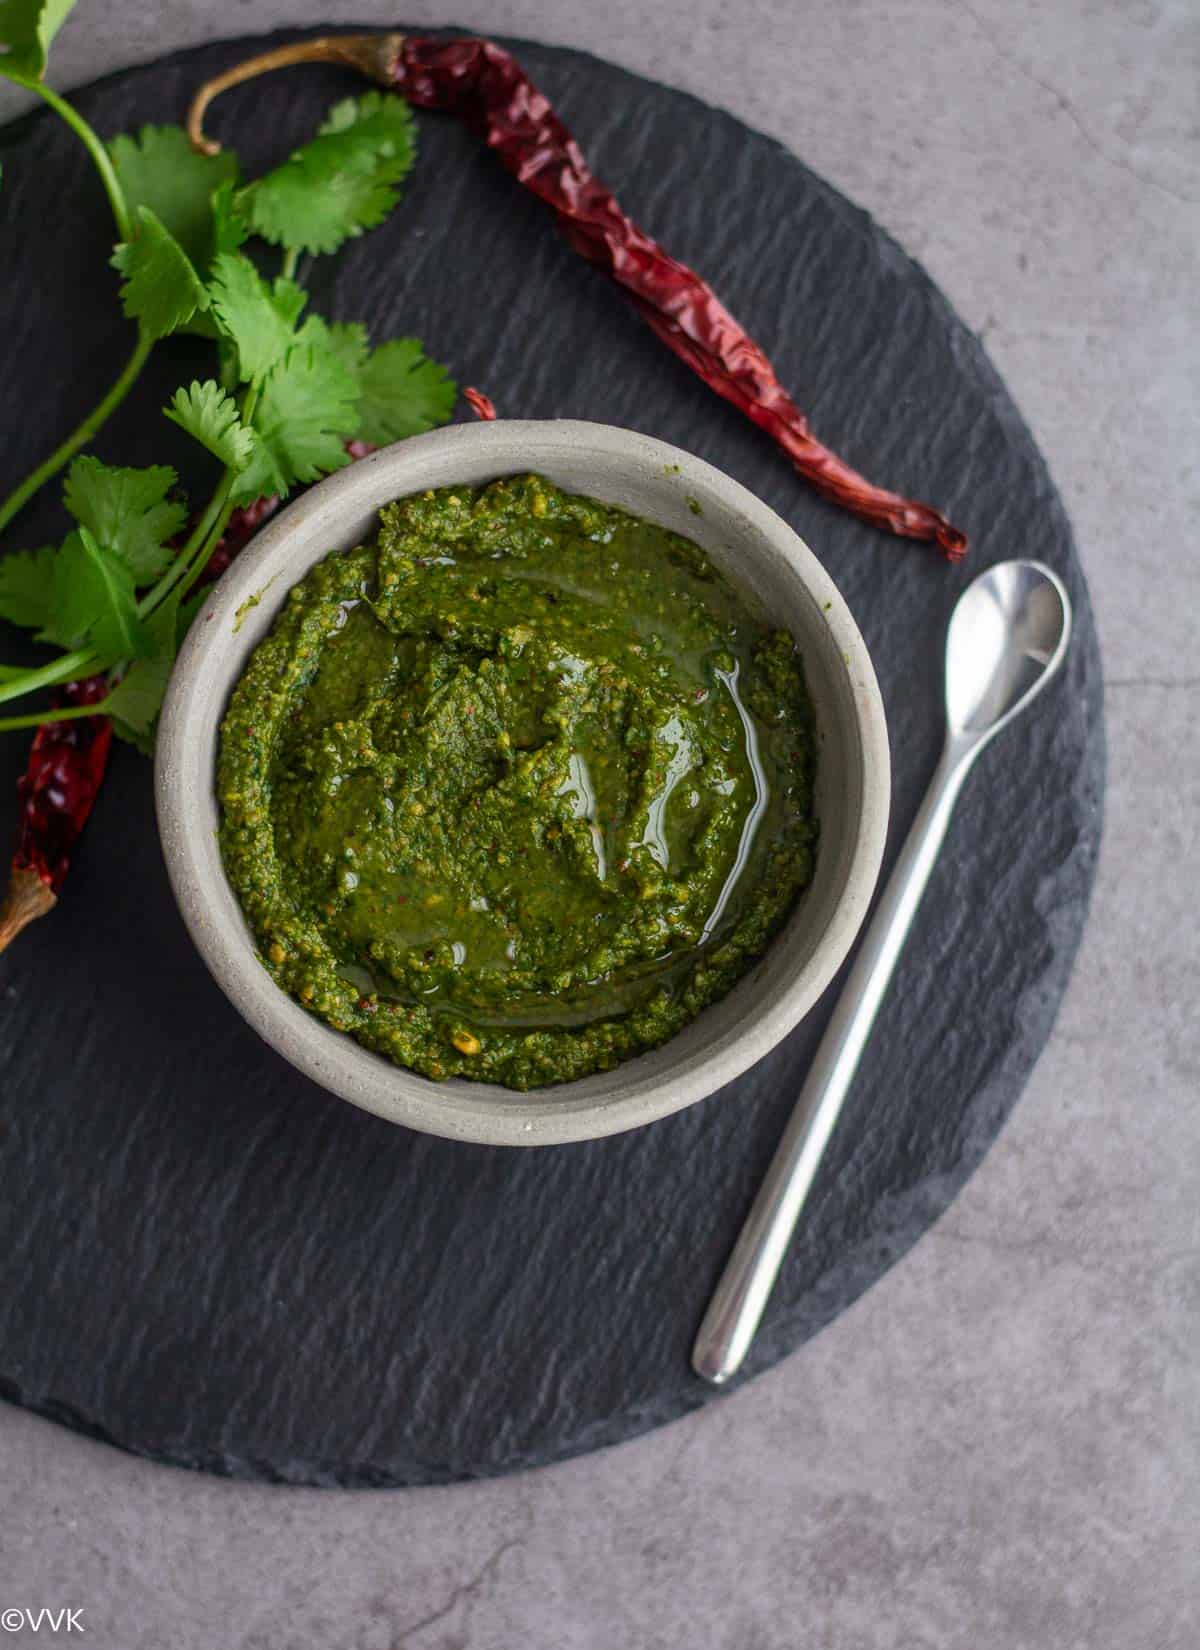 homemade cilantro shallots chutney in white bowl placed on black board with a spoon, dried chilies and cilantro on the side